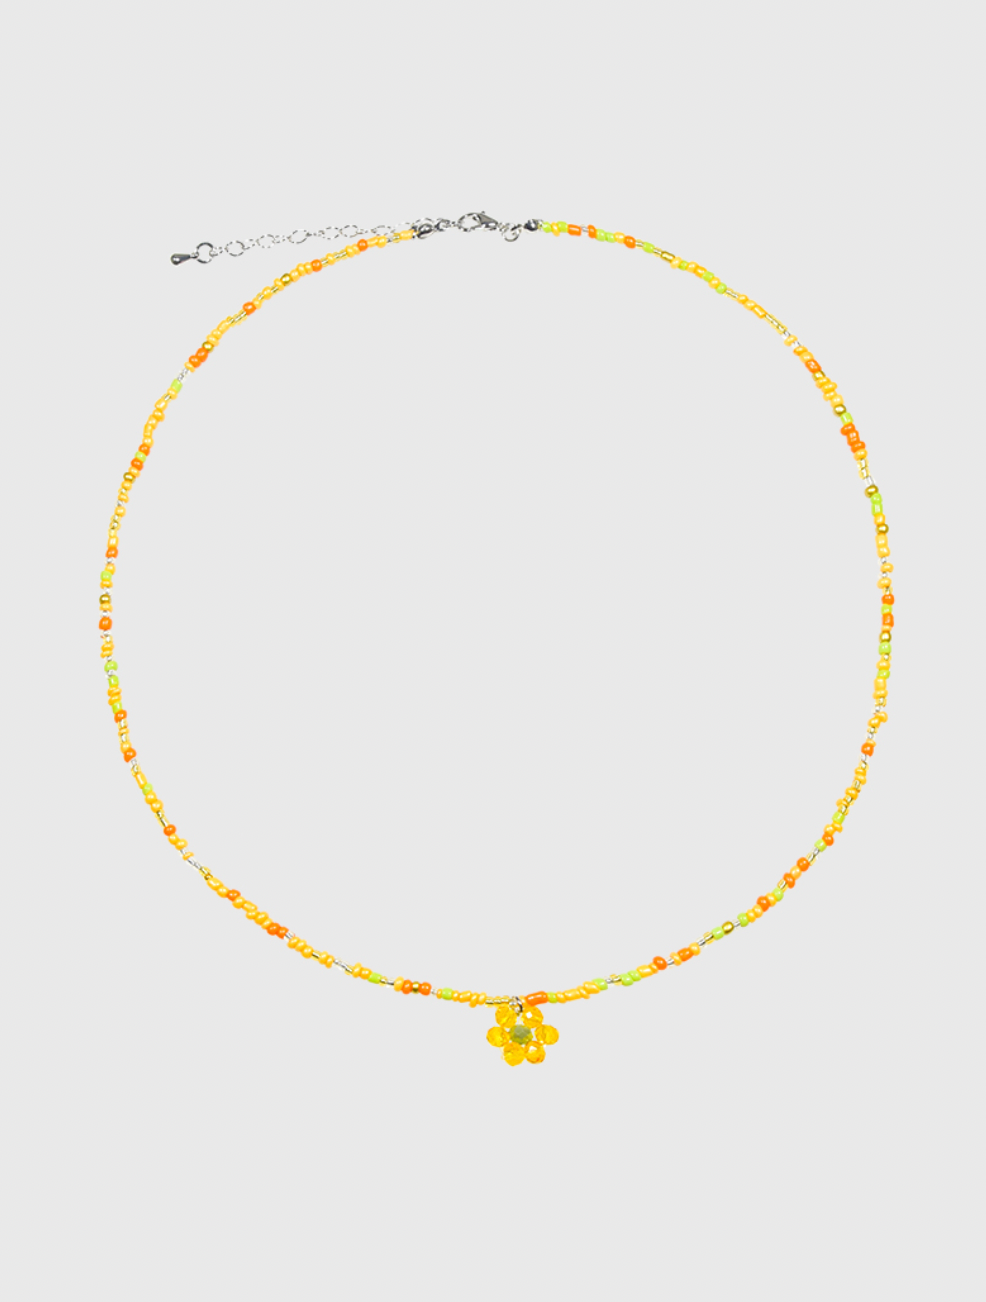 AWE Candy Color Beaded Flower Necklace